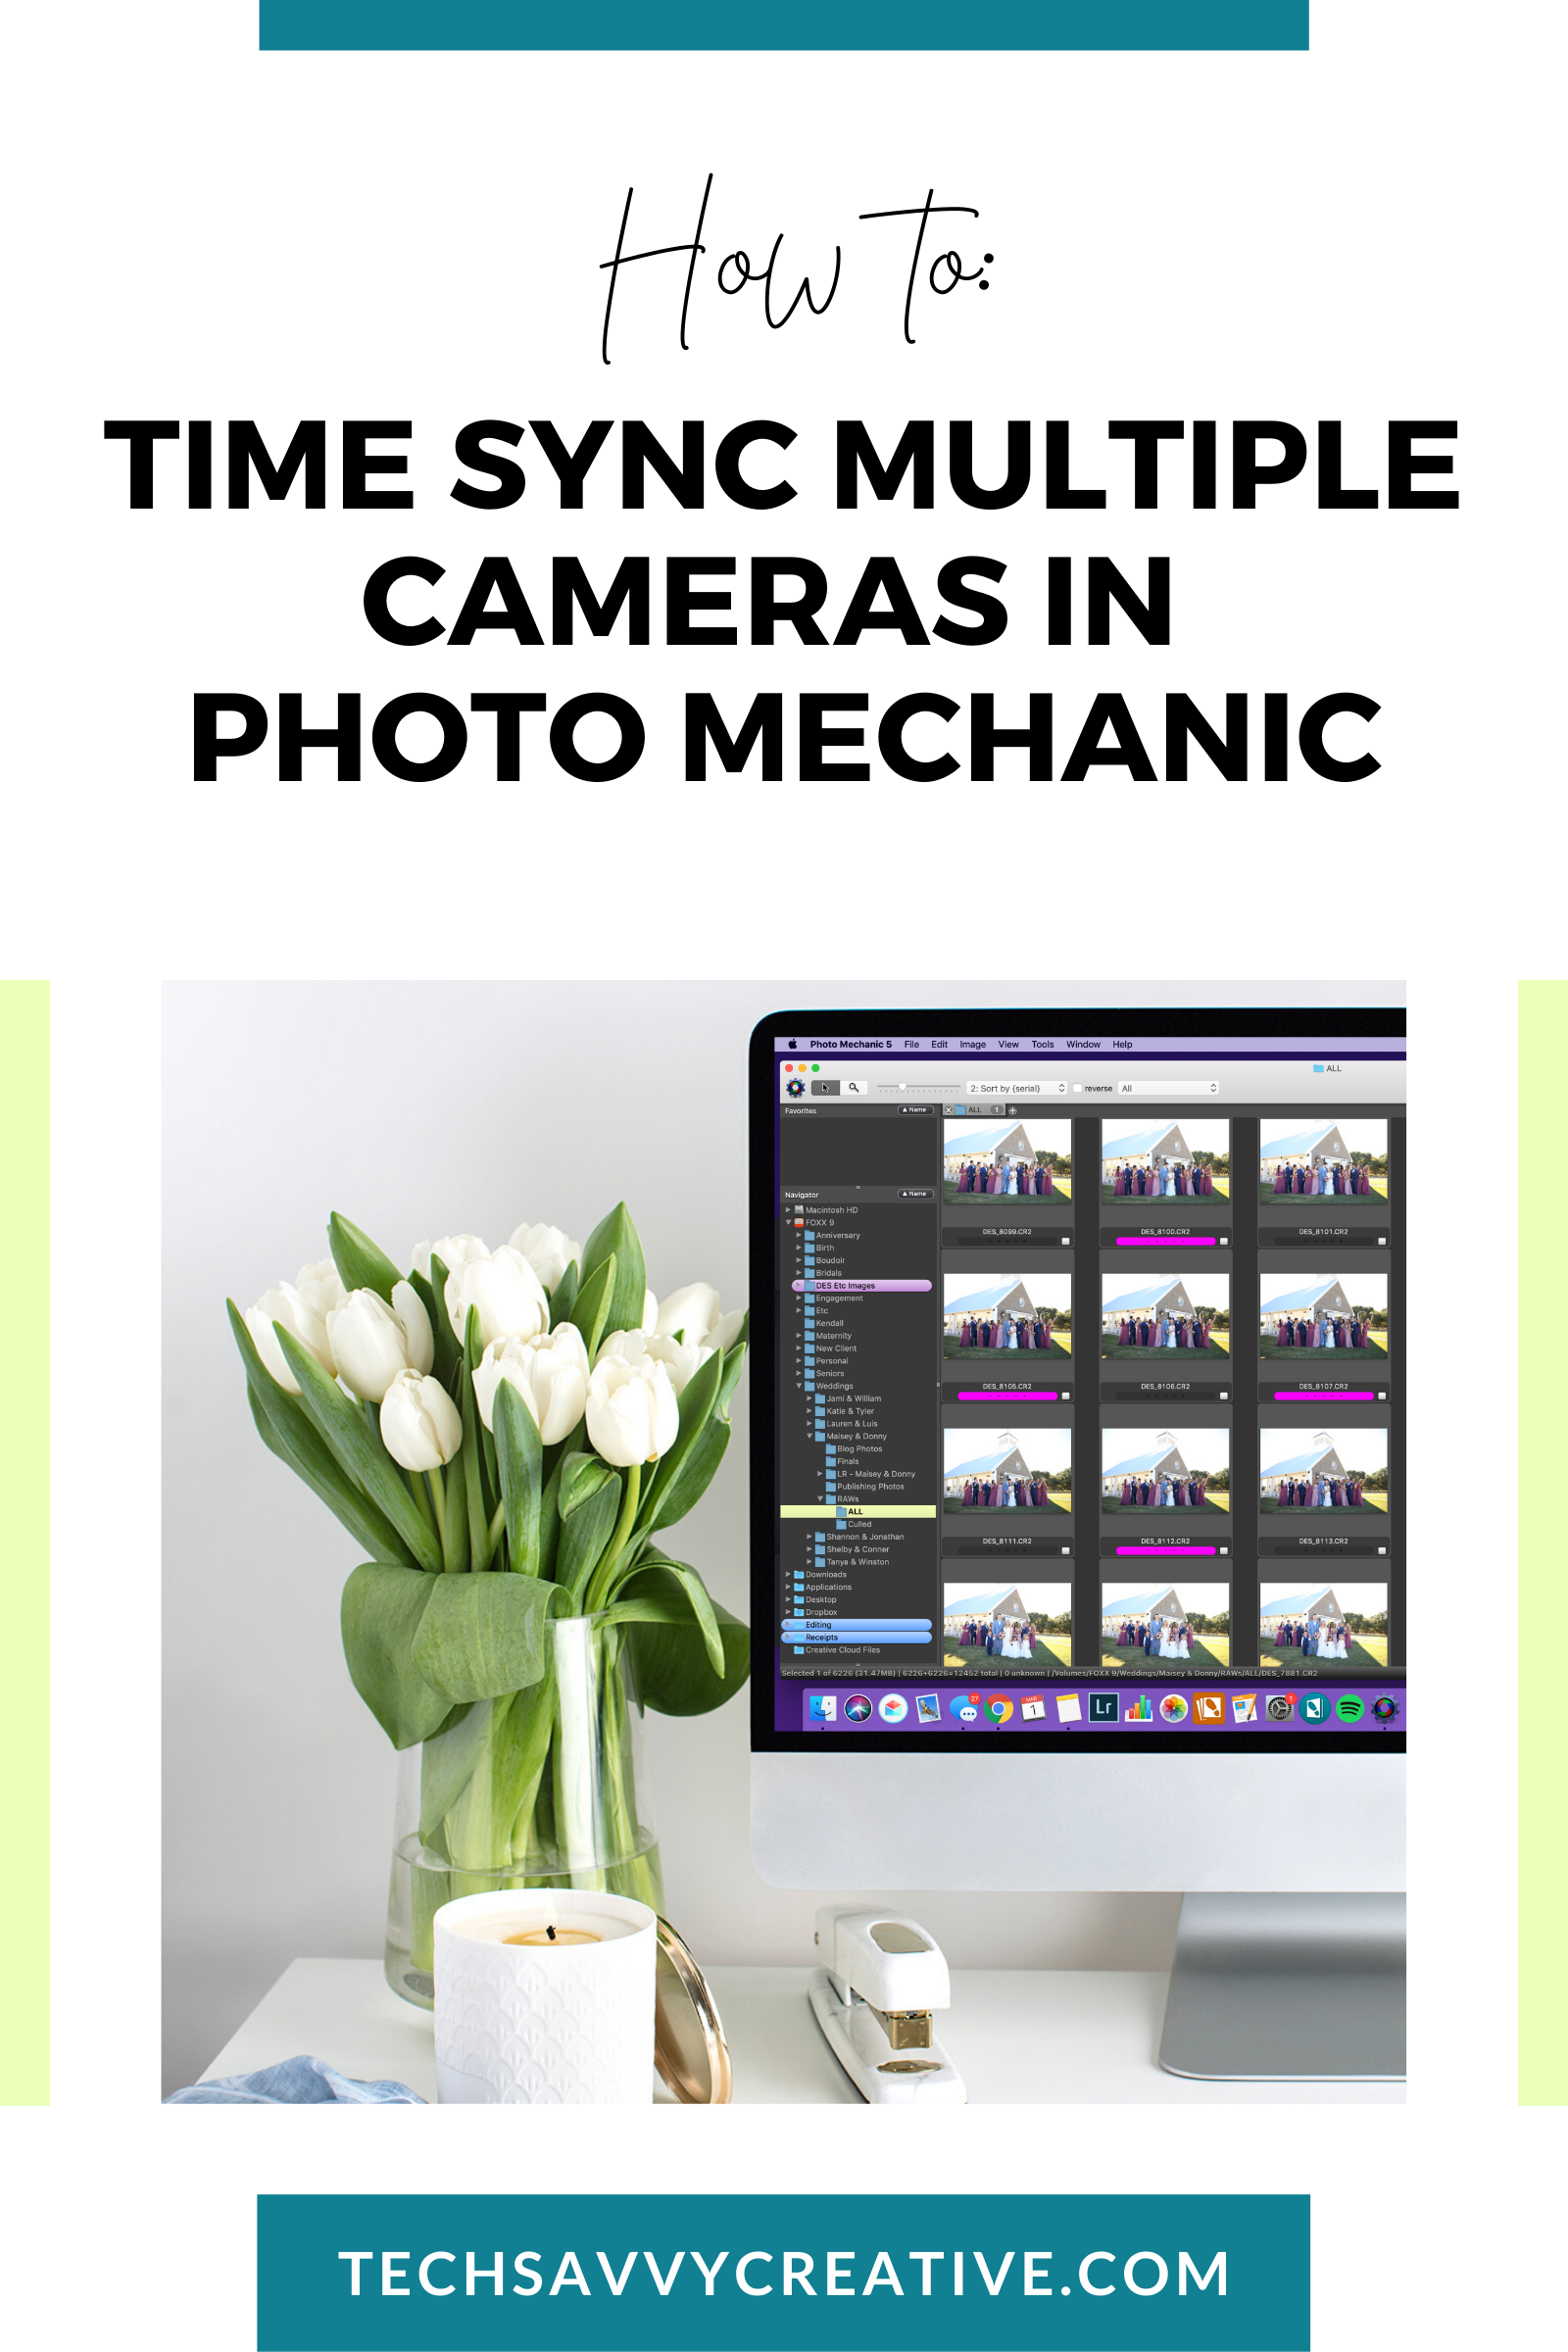 How To Time Sync Multiple Cameras Using Photo Mechanic, Tech Savvy Creative